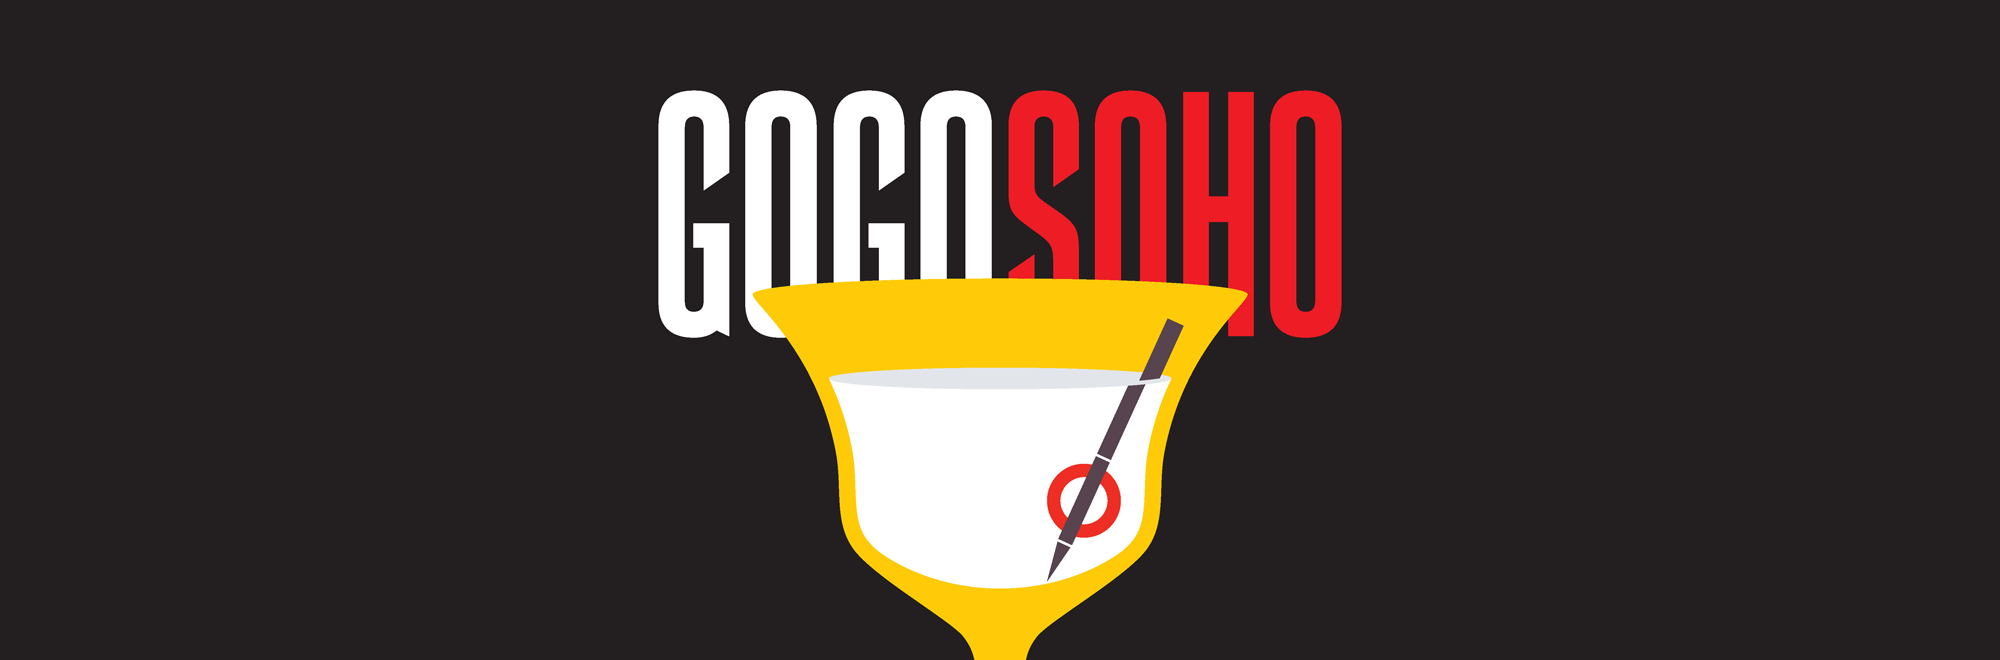 GOGOSOHO: Helping the small independent businesses of Soho get back on their feet